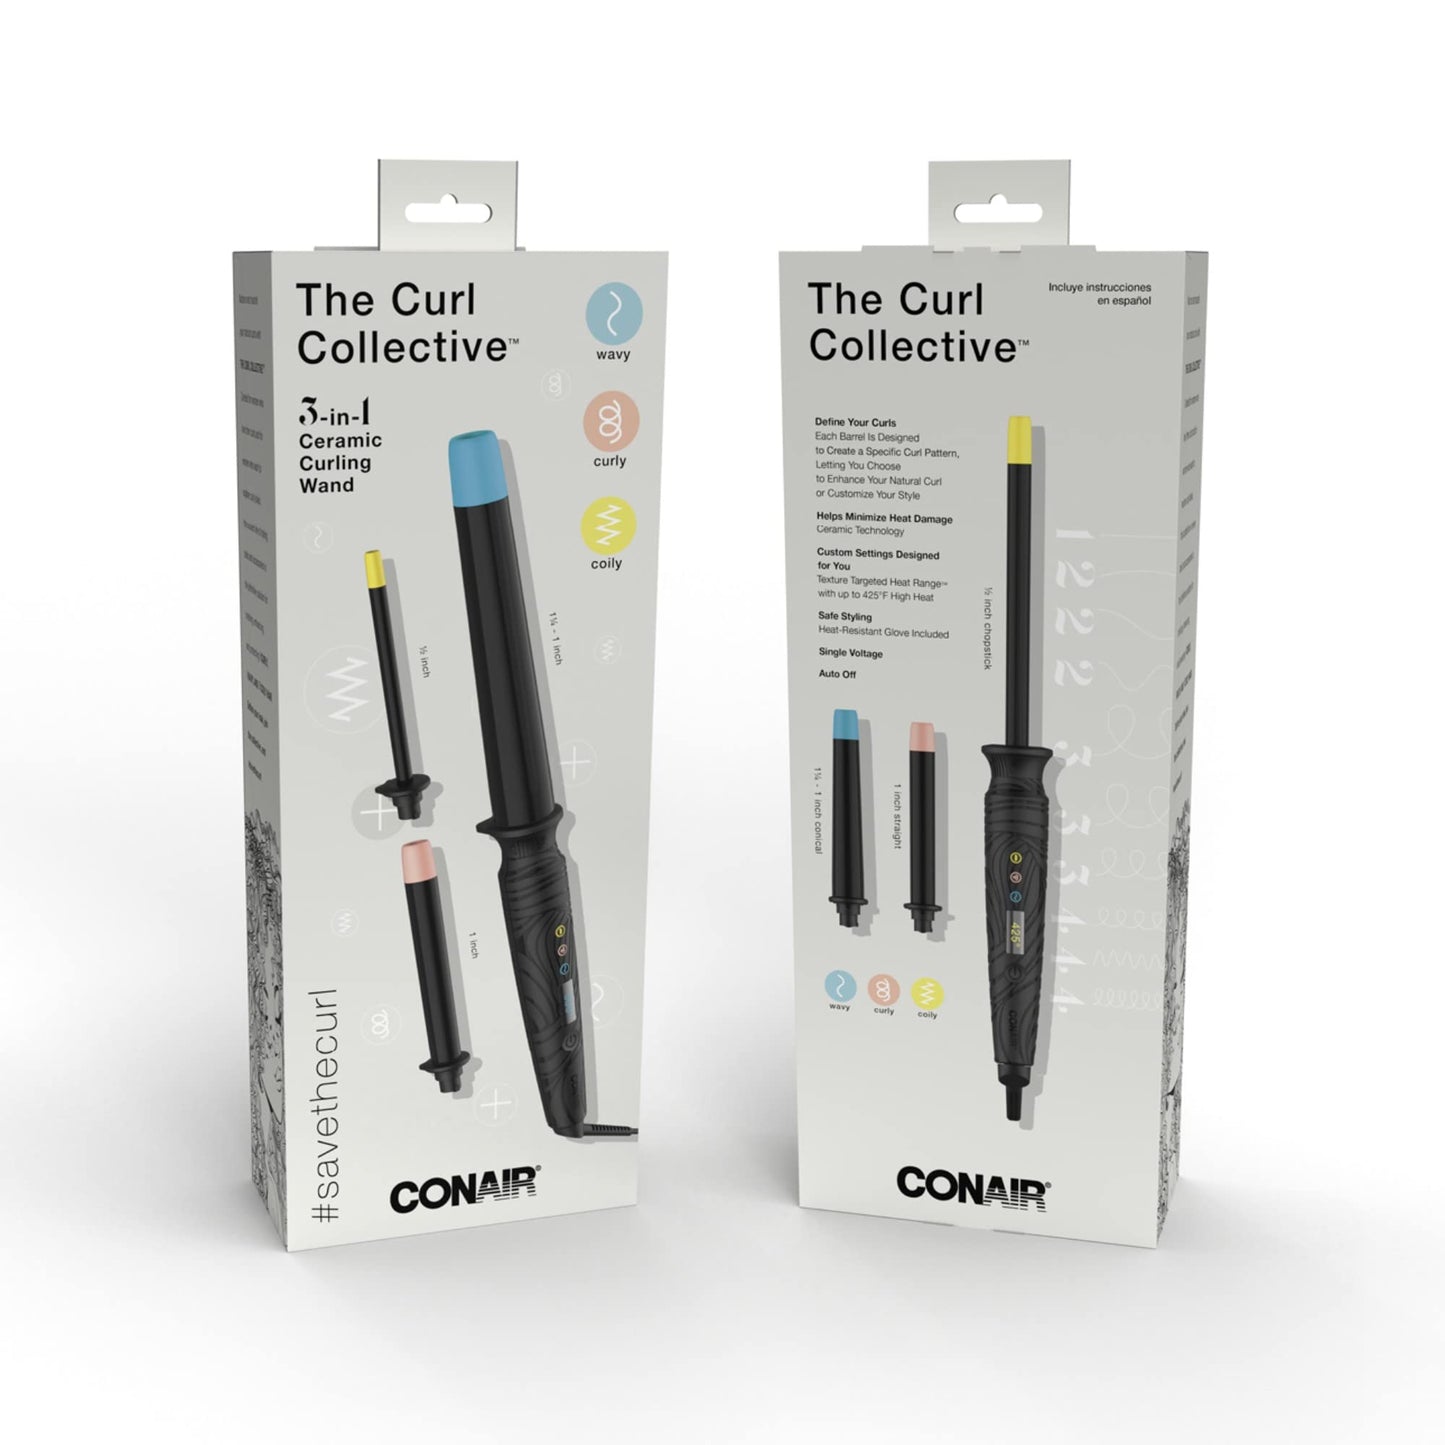 Conair The Curl Collective 3-in-1 Ceramic Curling Wand, 3 Interchangeable Barrels Designed to Create a Specific Curl Pattern - Chopstick, 1-inch, and 1 1/4-inch to 1-inch Tapered Barrel